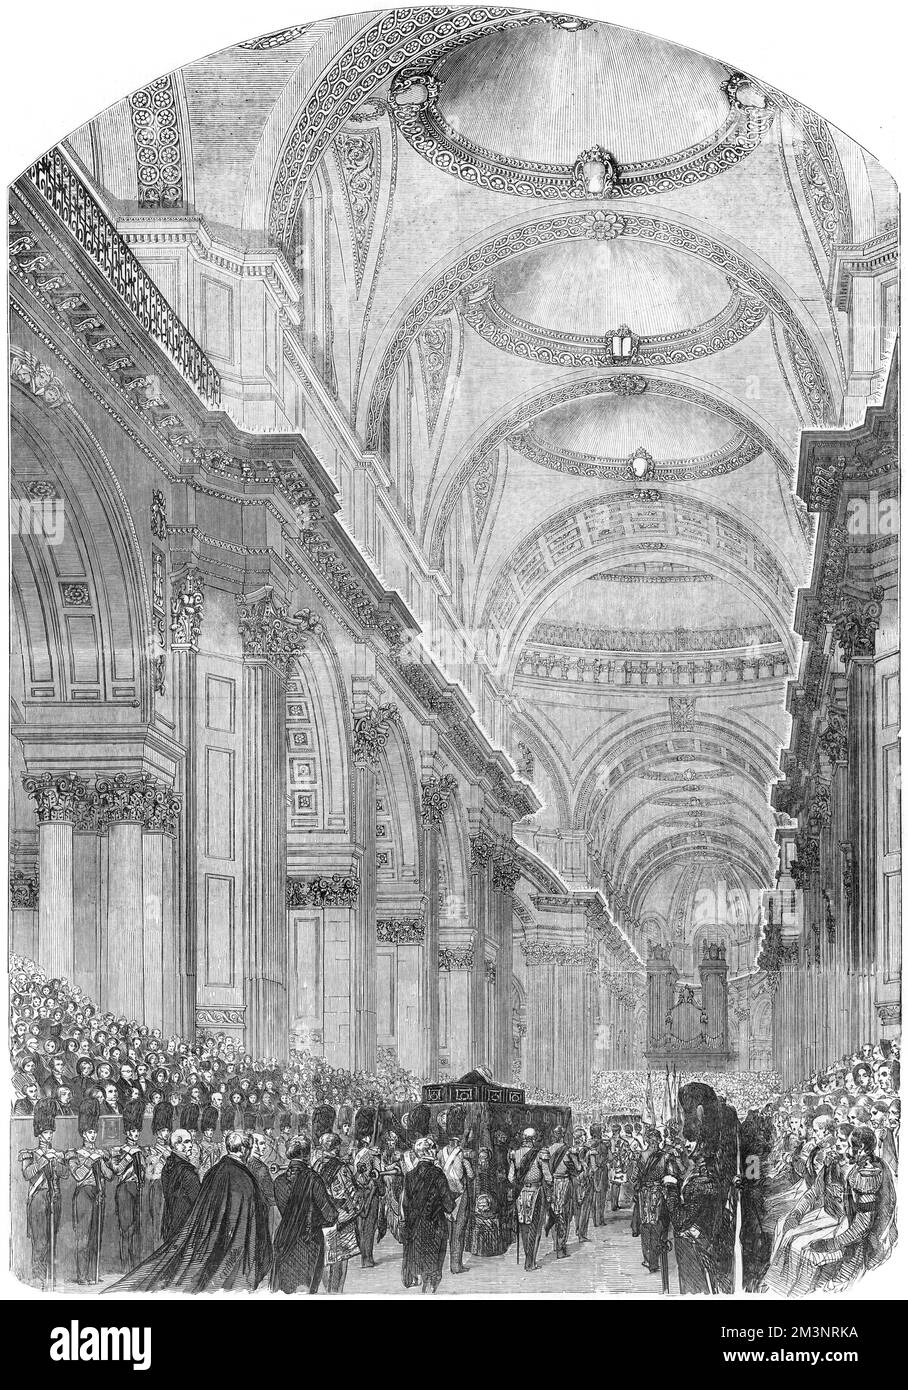 The funeral of the Duke of Wellington at St Paul's cathedral: the procession in the nave.     Date: 1852 Stock Photo